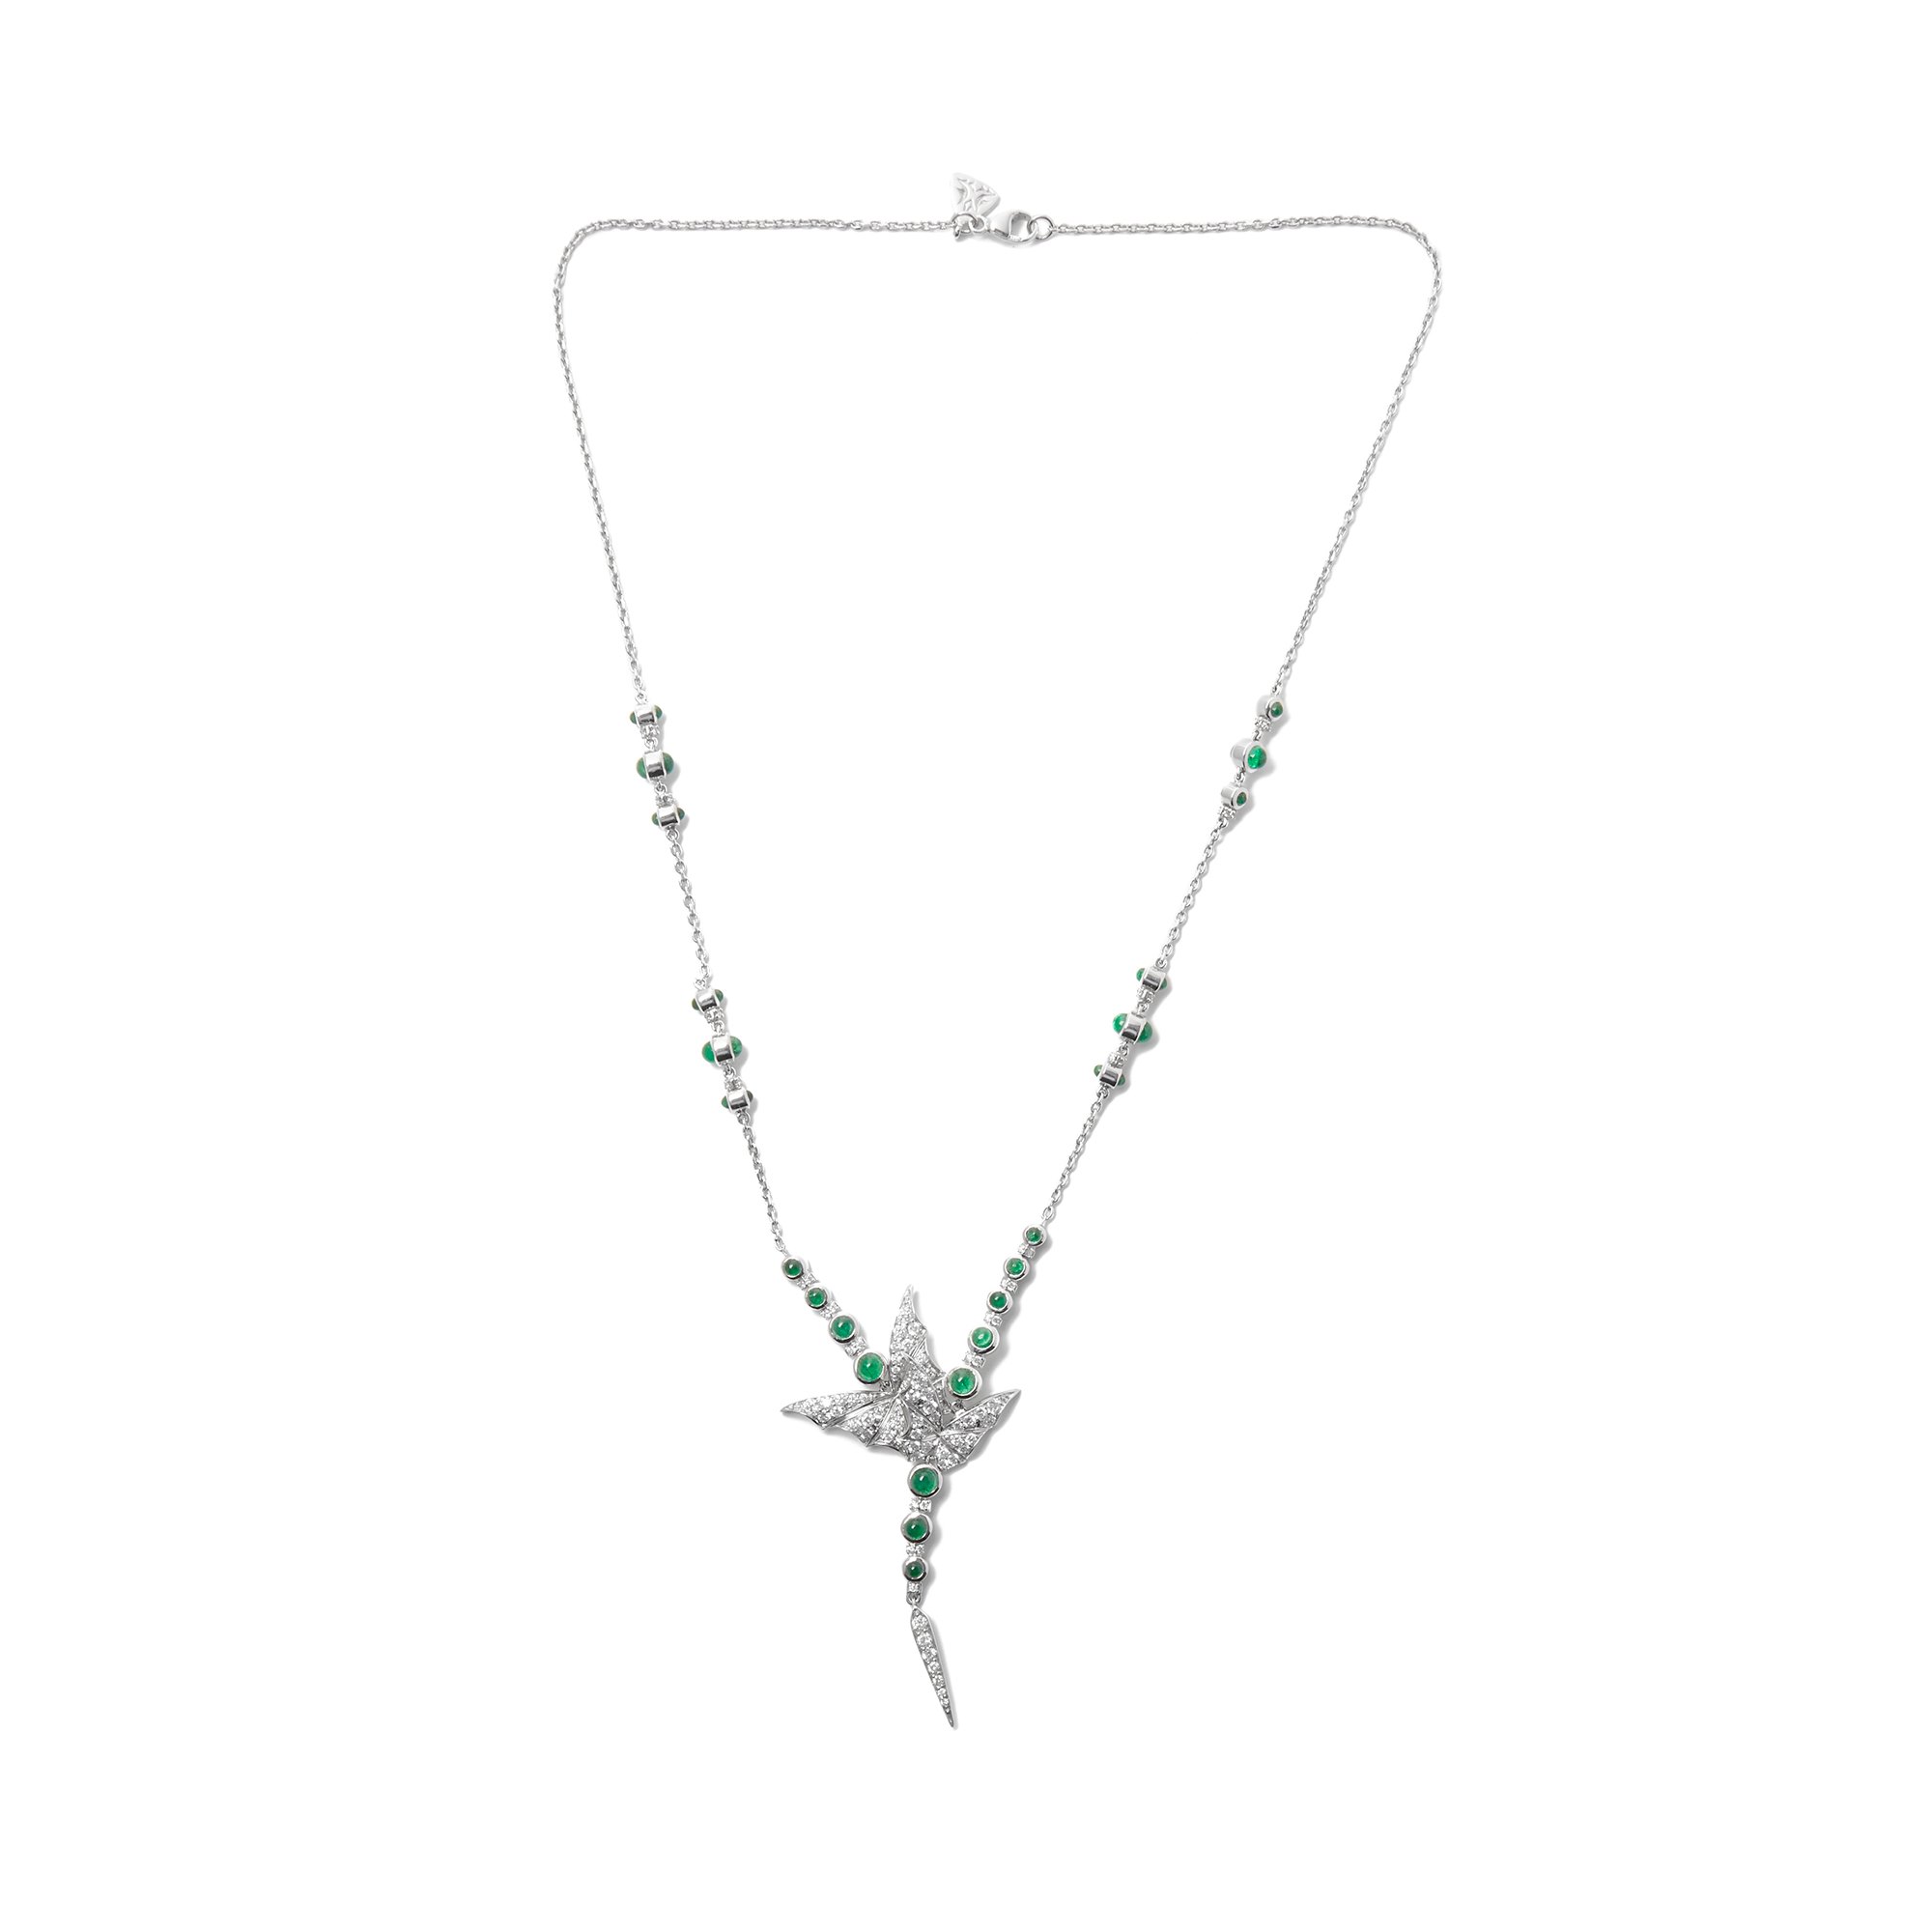 Stephen Webster 18ct Gold Fly by Night Diamond and Emerald necklace